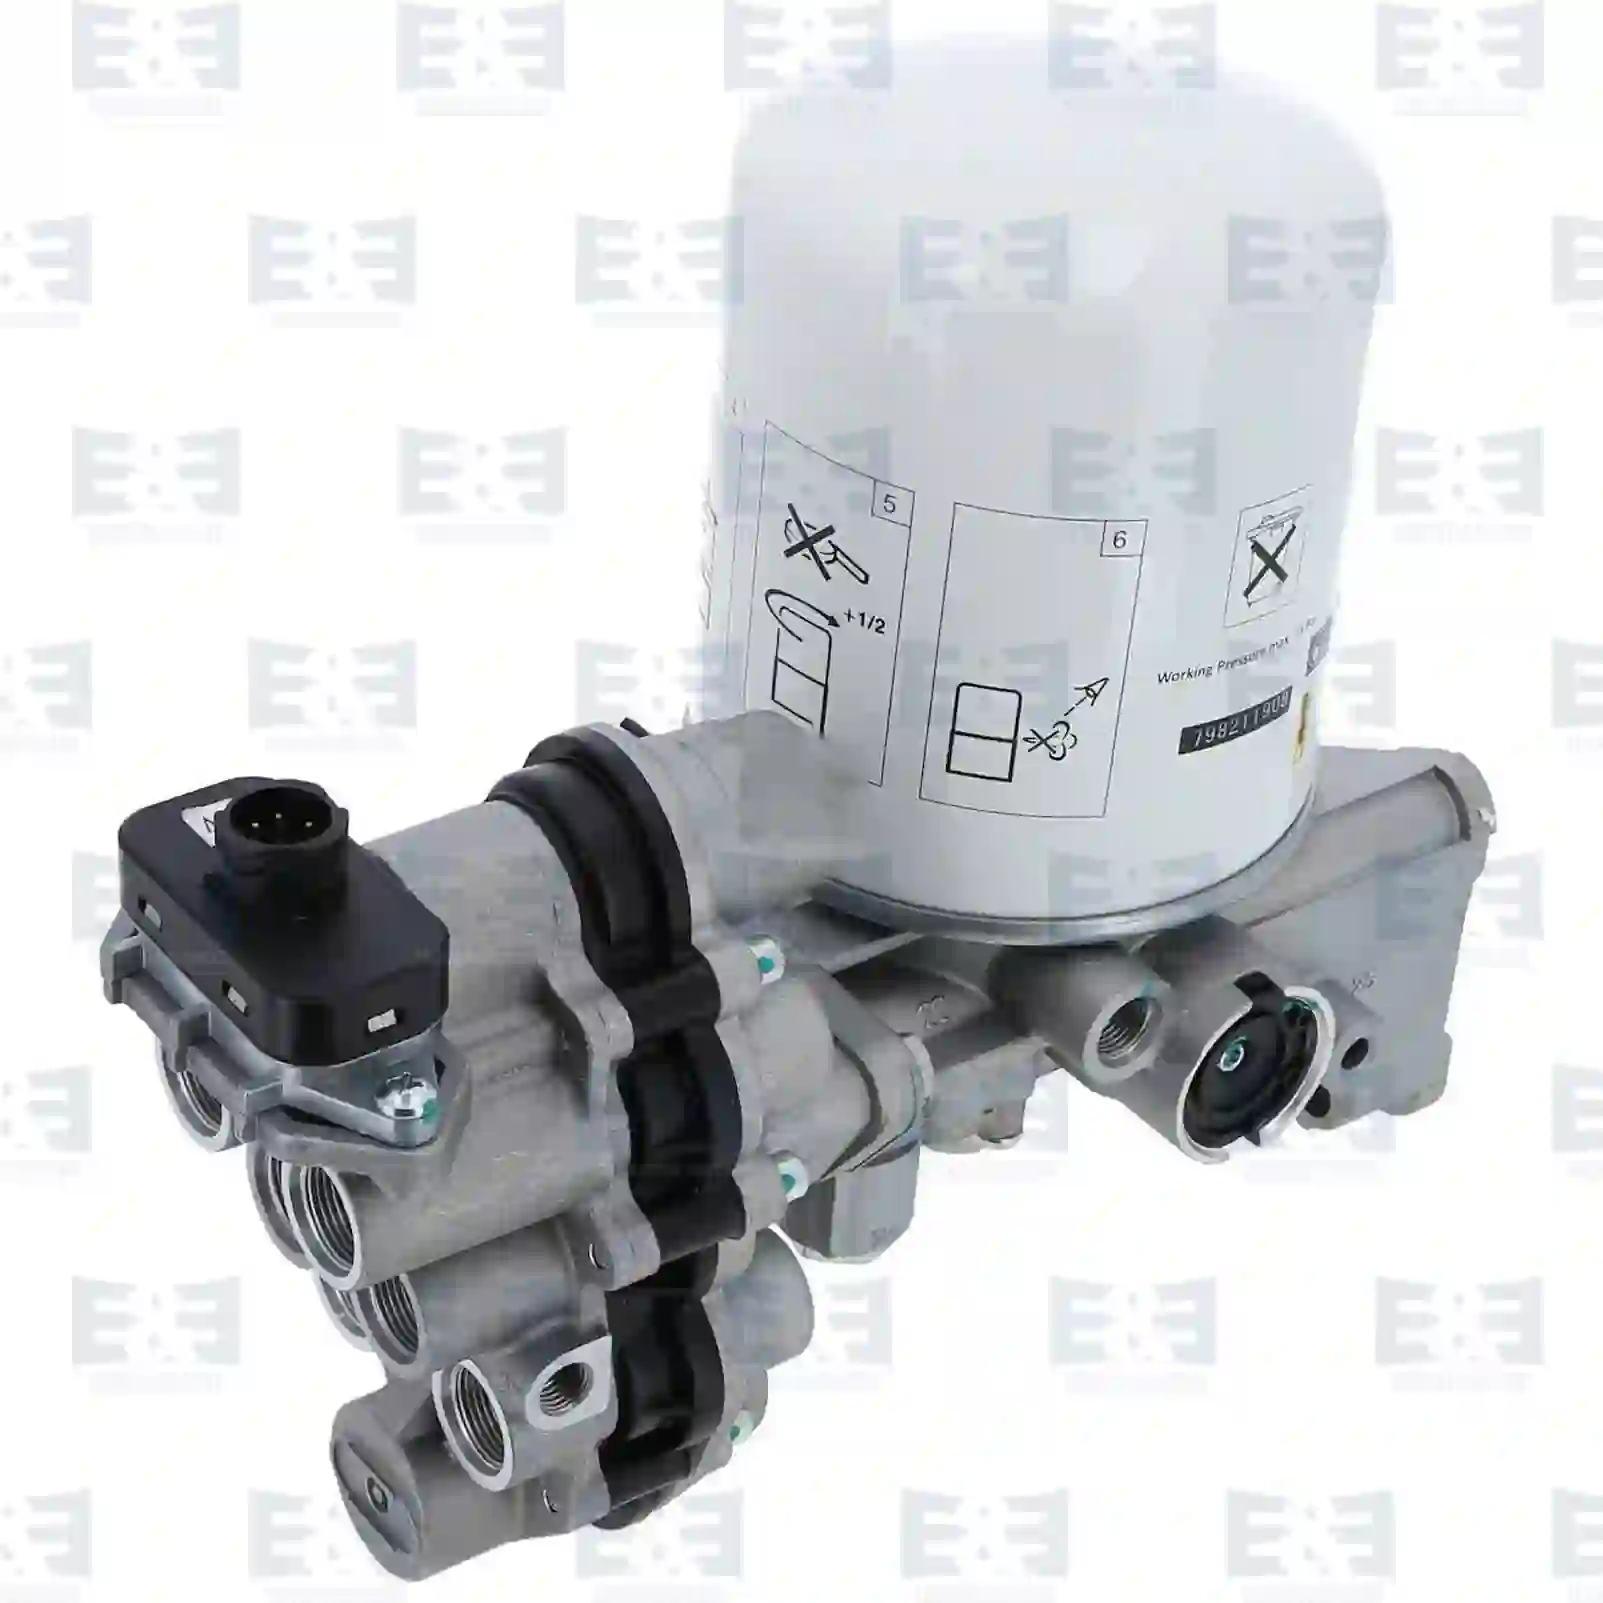 Air dryer, complete with valve, with heating unit, 2E2295990, 1518170, 0024310515, 0024310715, ZG50056-0008 ||  2E2295990 E&E Truck Spare Parts | Truck Spare Parts, Auotomotive Spare Parts Air dryer, complete with valve, with heating unit, 2E2295990, 1518170, 0024310515, 0024310715, ZG50056-0008 ||  2E2295990 E&E Truck Spare Parts | Truck Spare Parts, Auotomotive Spare Parts